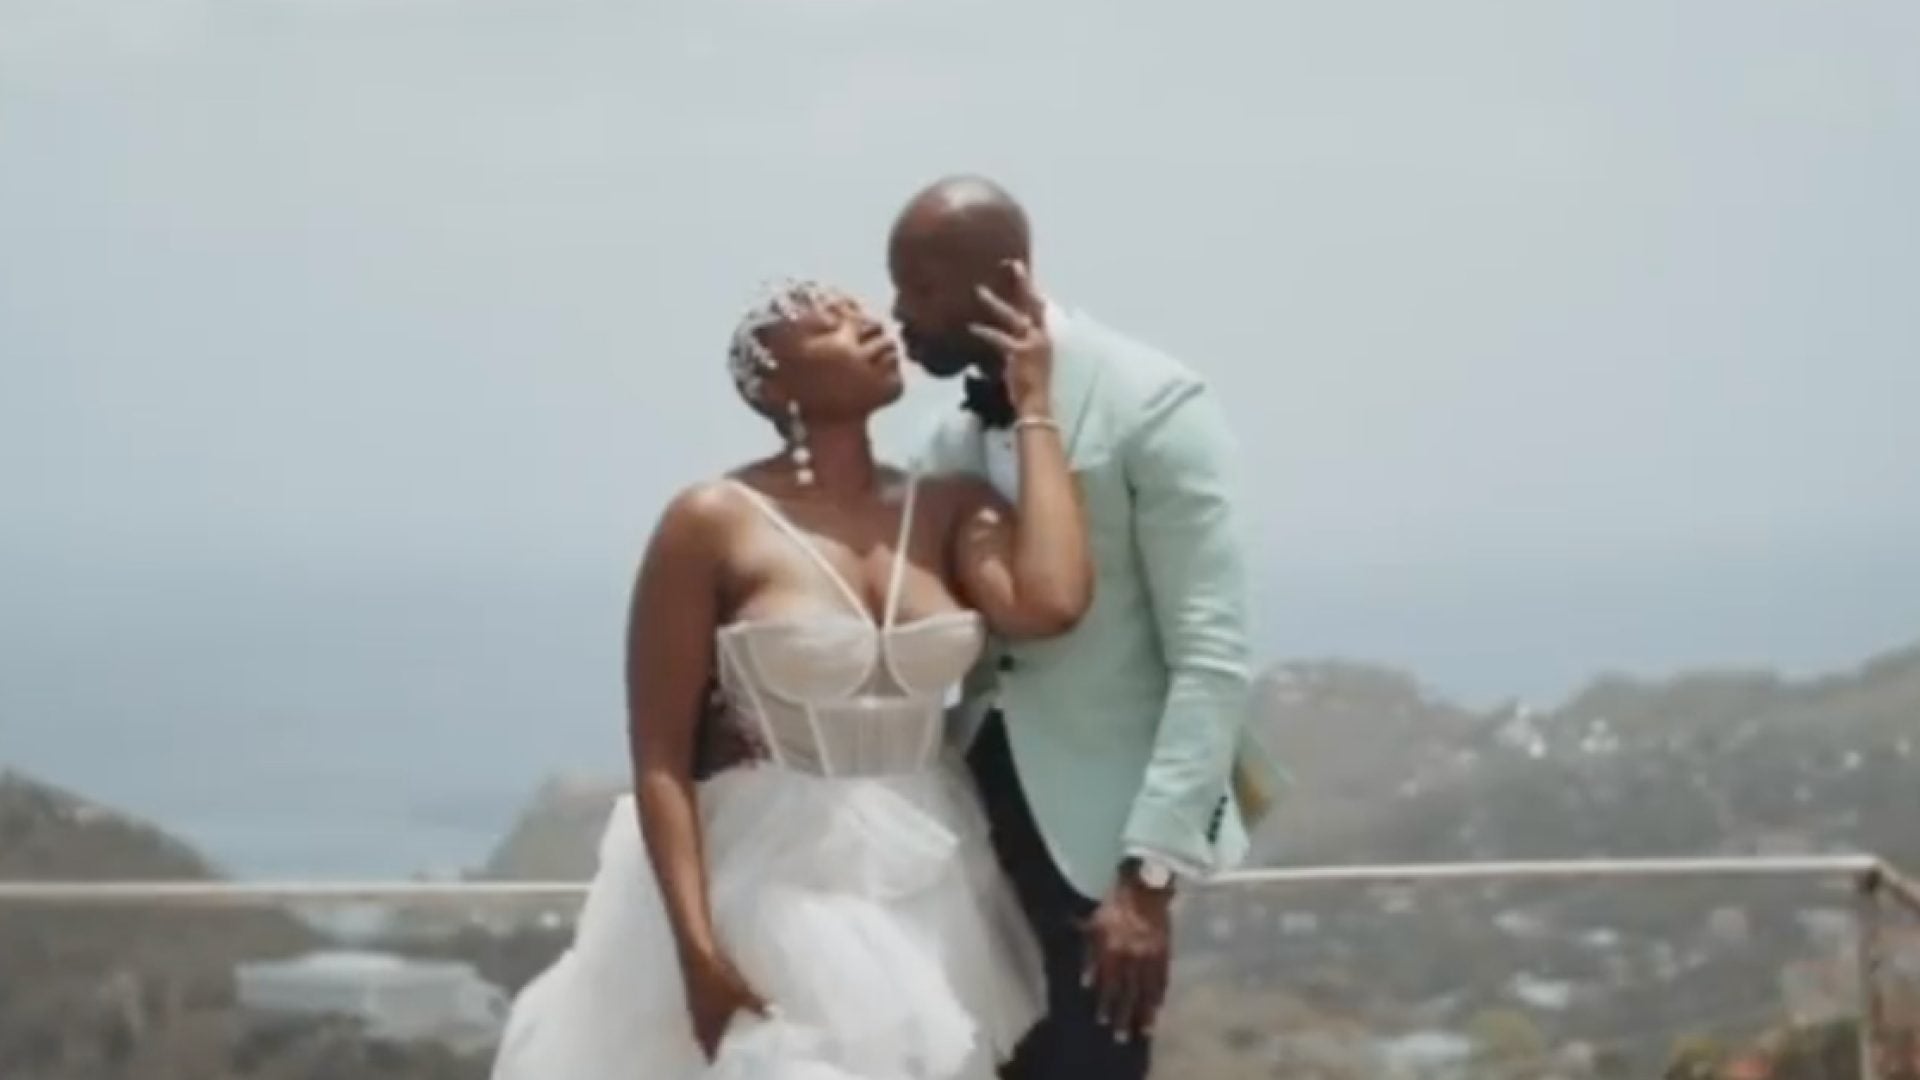 Actress Aisha Hinds Is A Married Woman! See Footage From Her Epic Wedding Weekend In Grenada